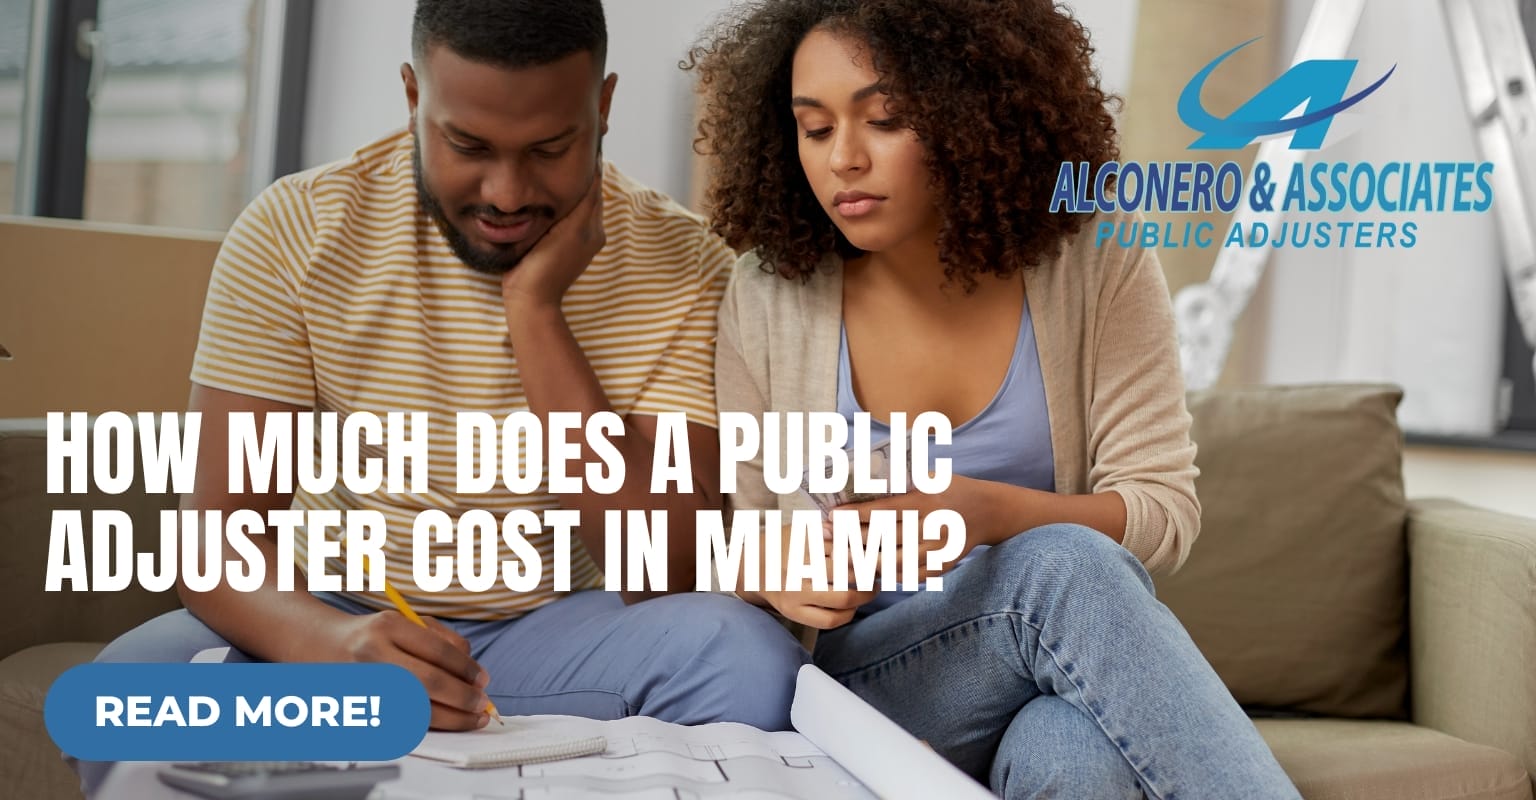 How Much Does a Public Adjuster Cost in Miami?